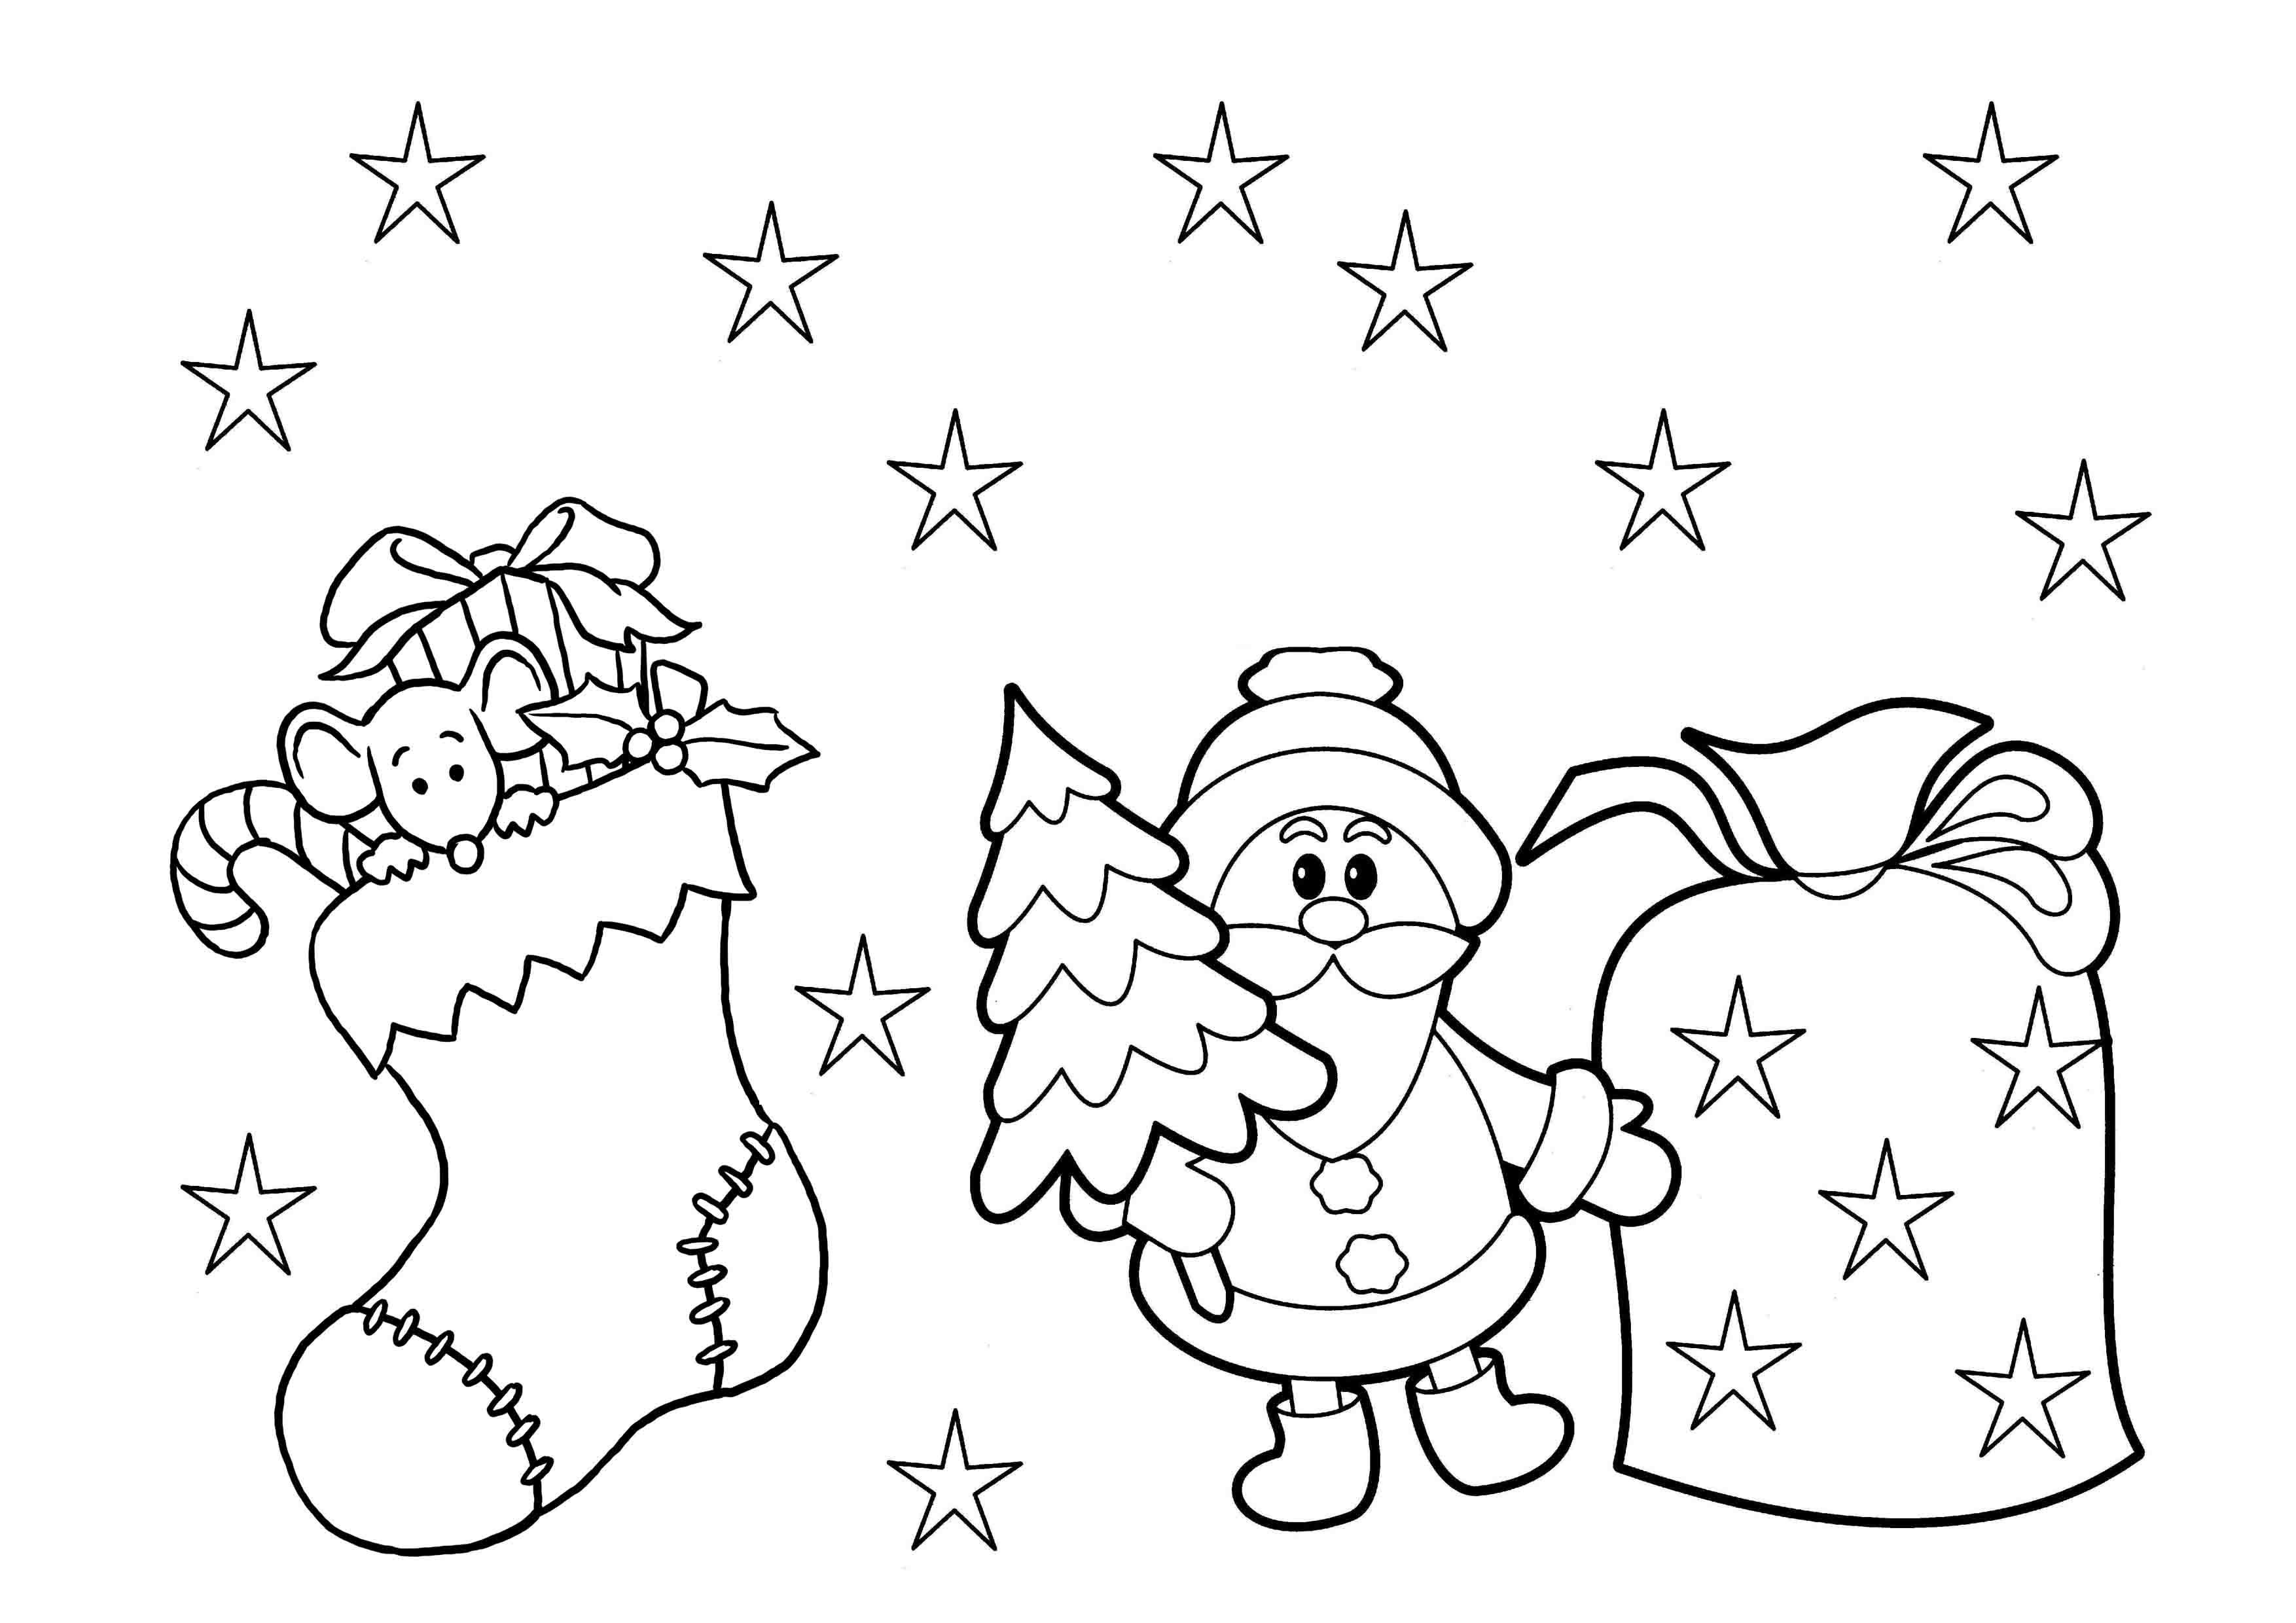 Print &amp;amp; Download - Printable Christmas Coloring Pages For Kids - Free Printable Christmas Coloring Pages And Activities